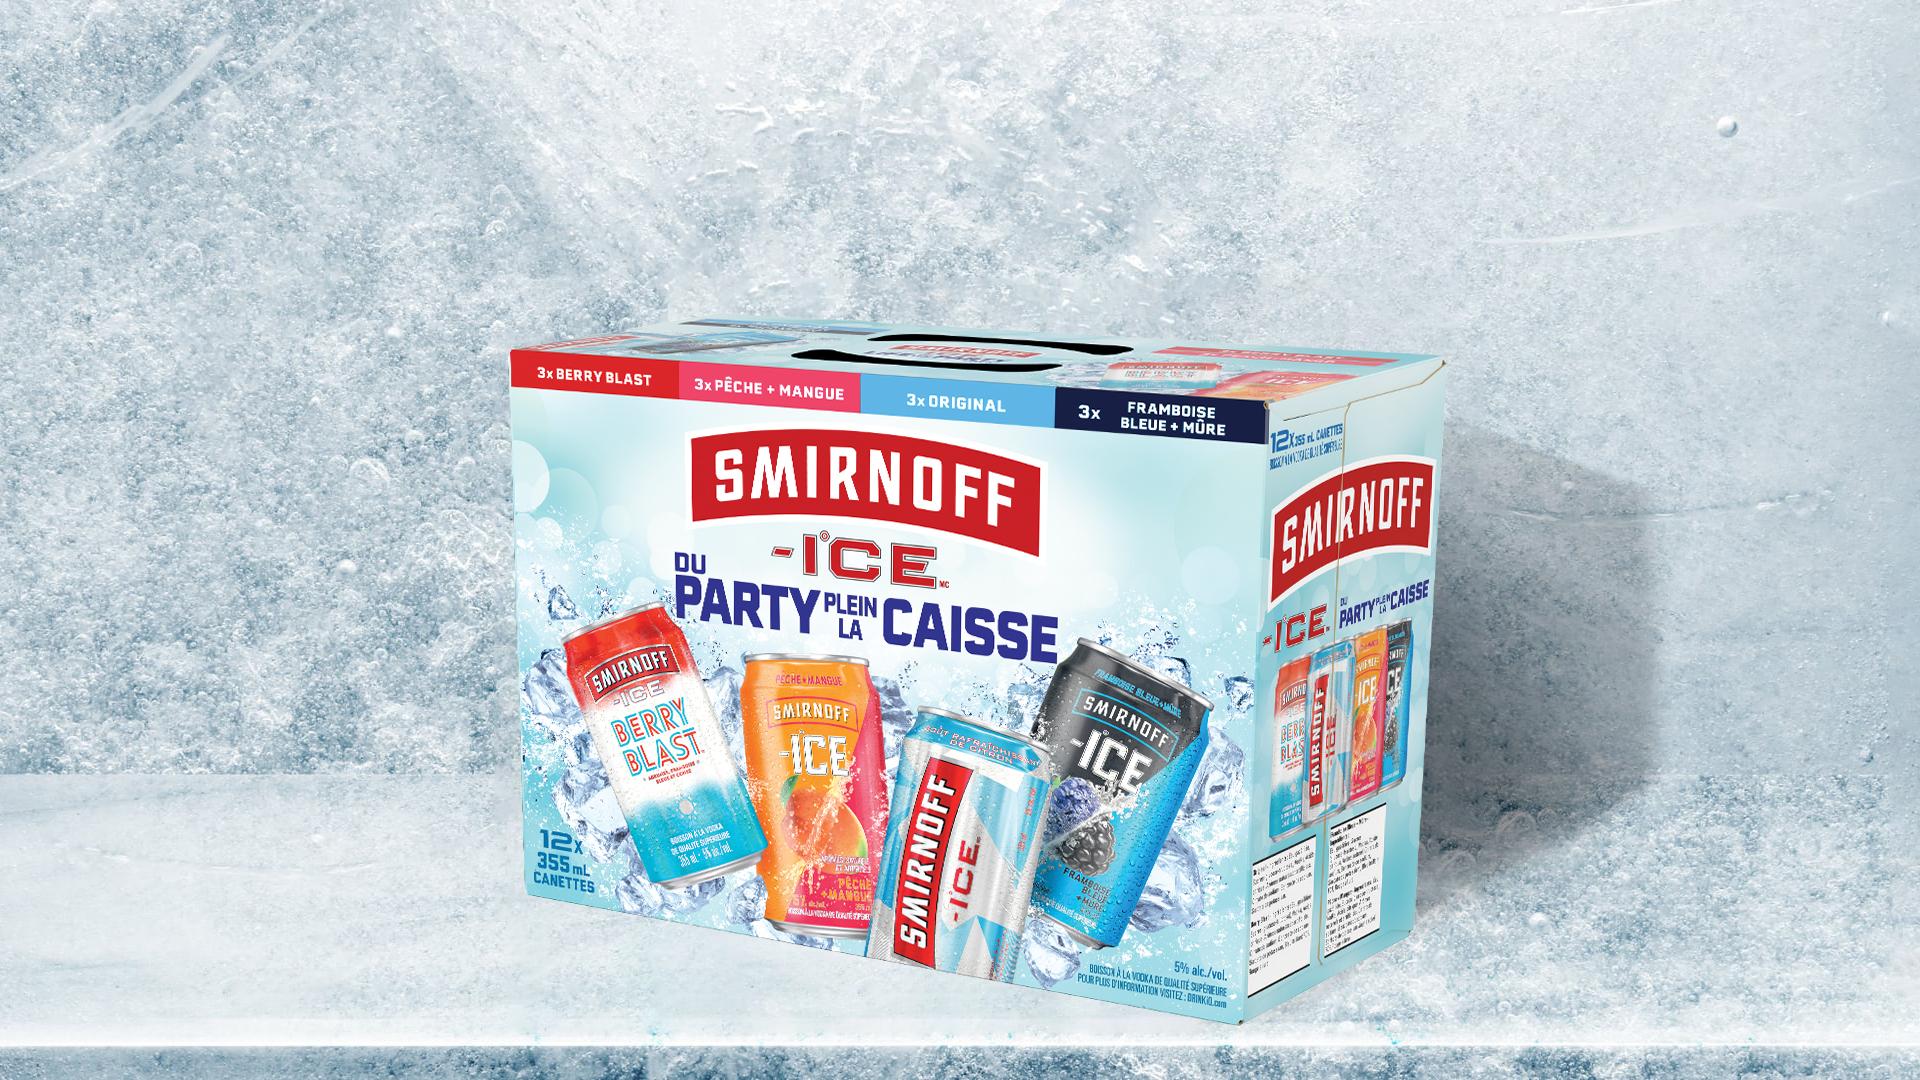 Smirnoff Ice Life Of The Party Variety Pack on a Icy background